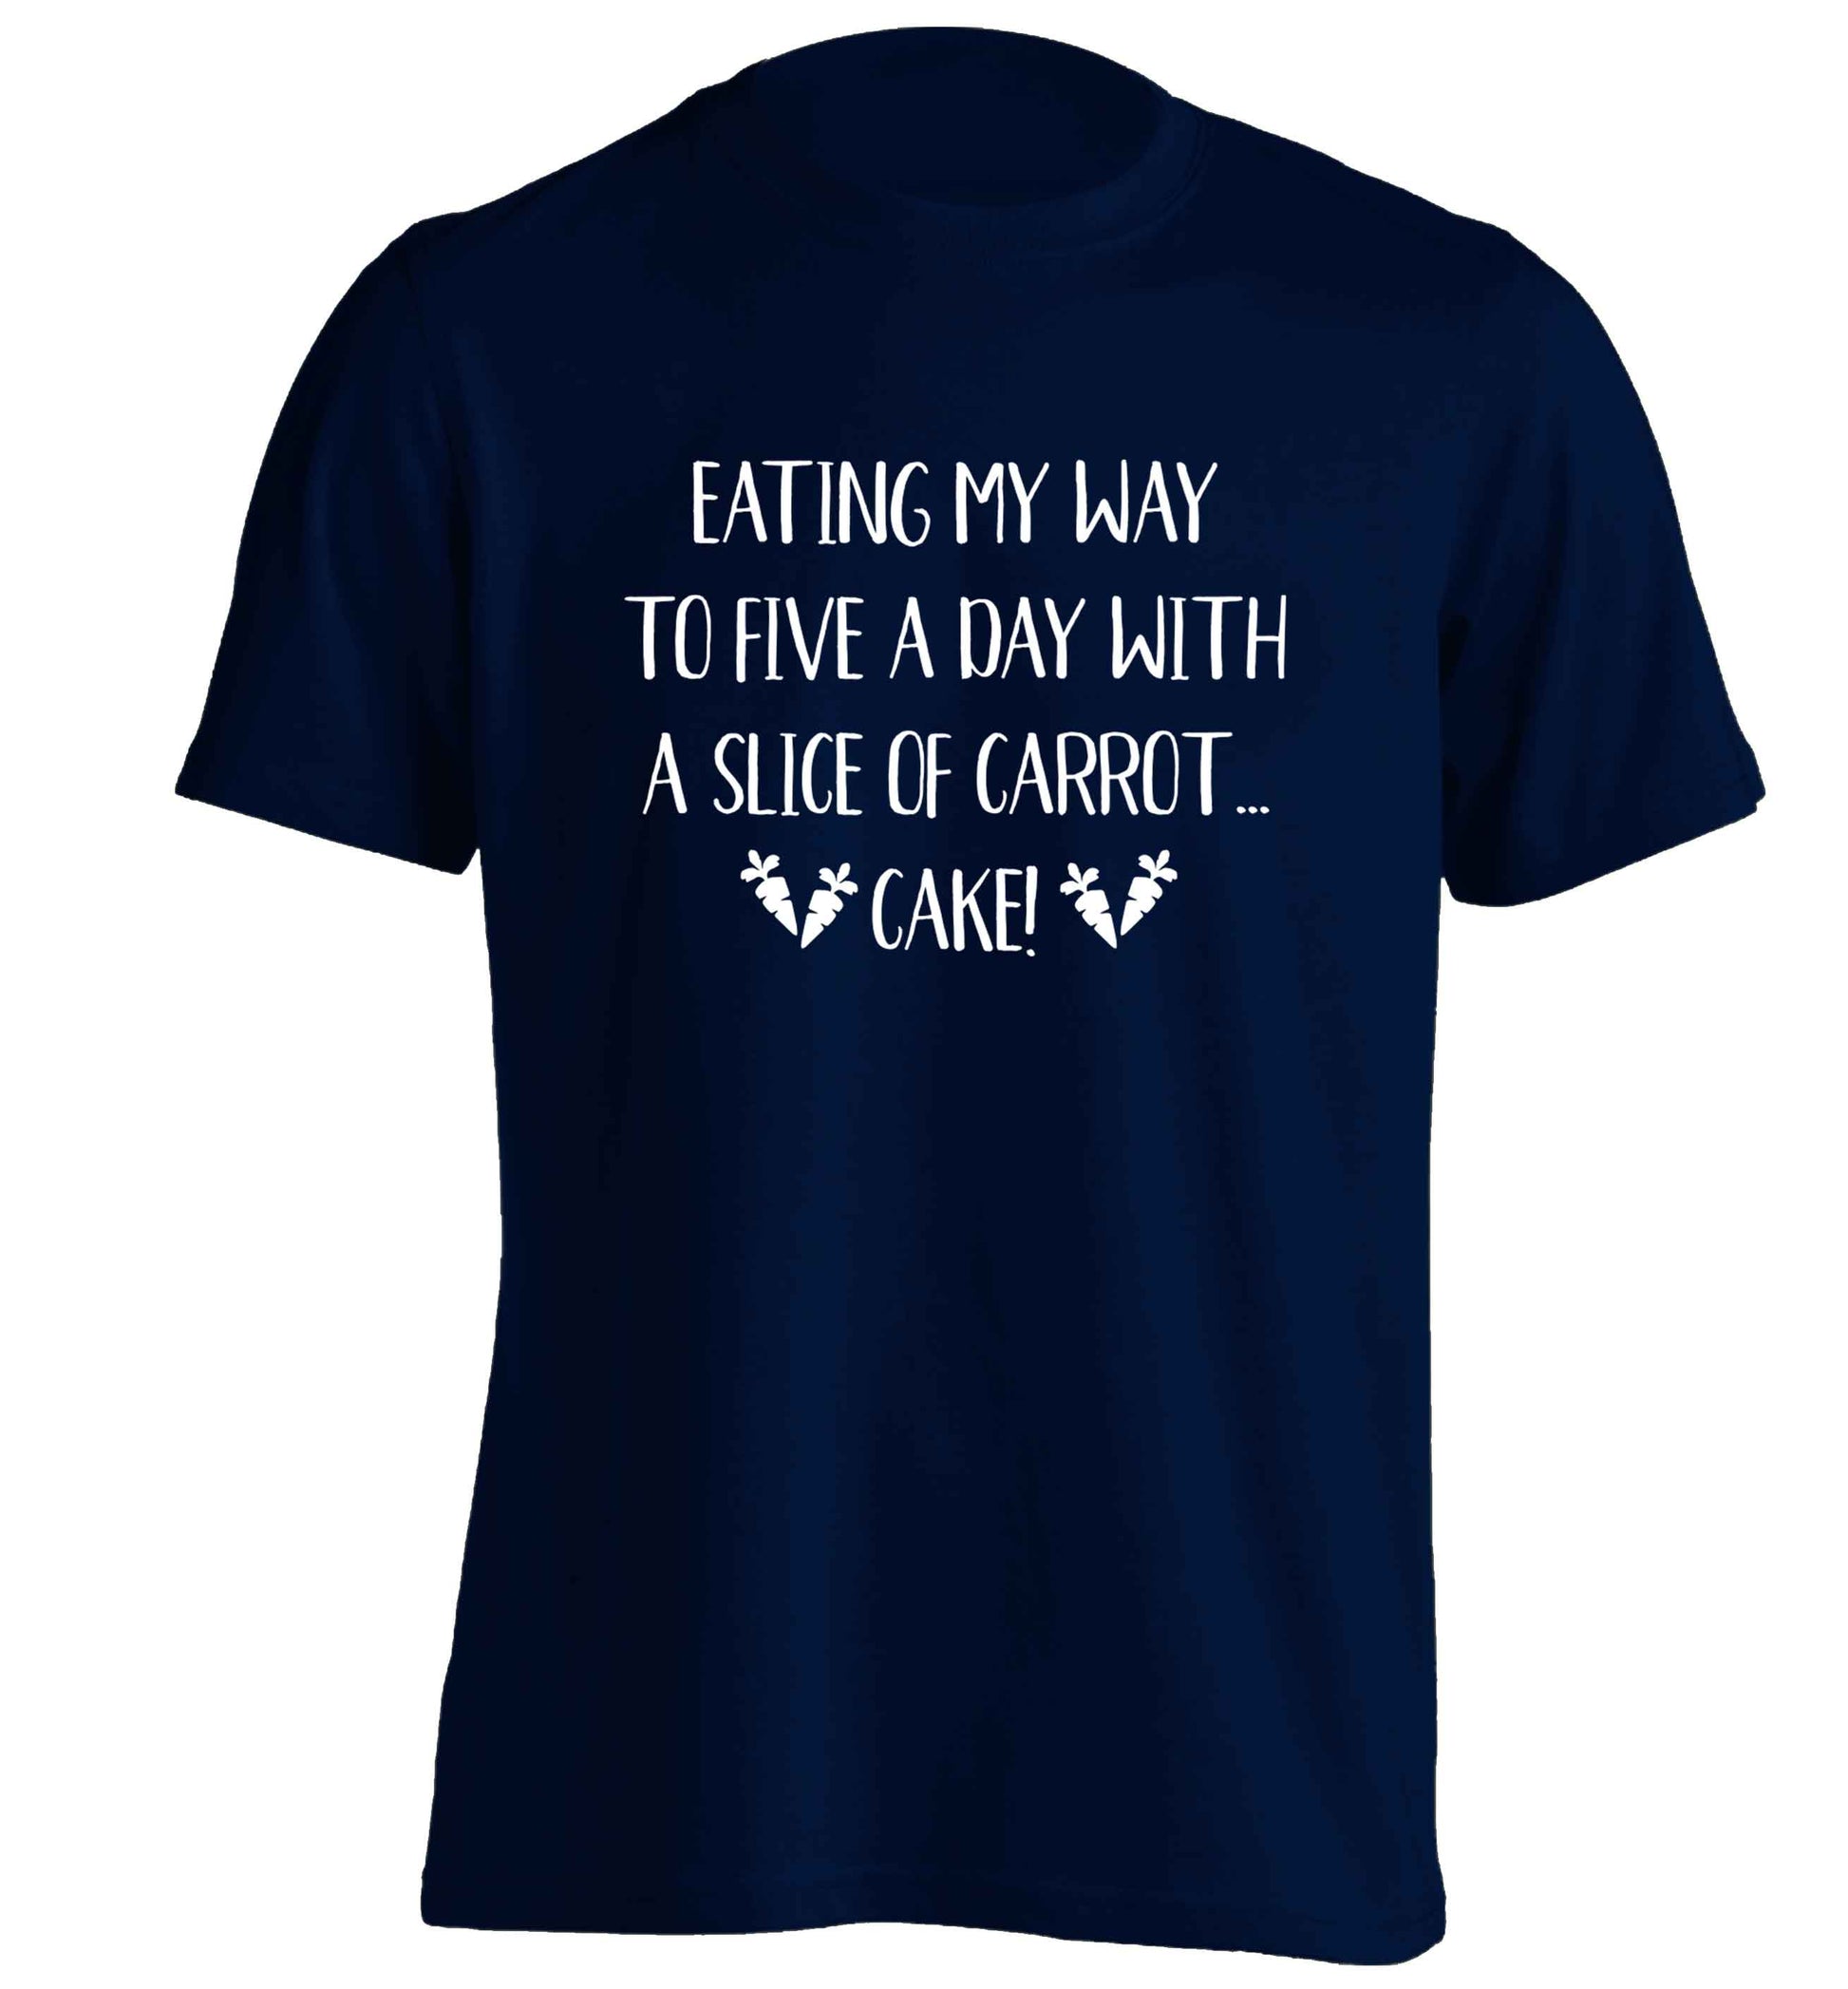 Eating my way to five a day with a slice of carrot cake day adults unisex navy Tshirt 2XL